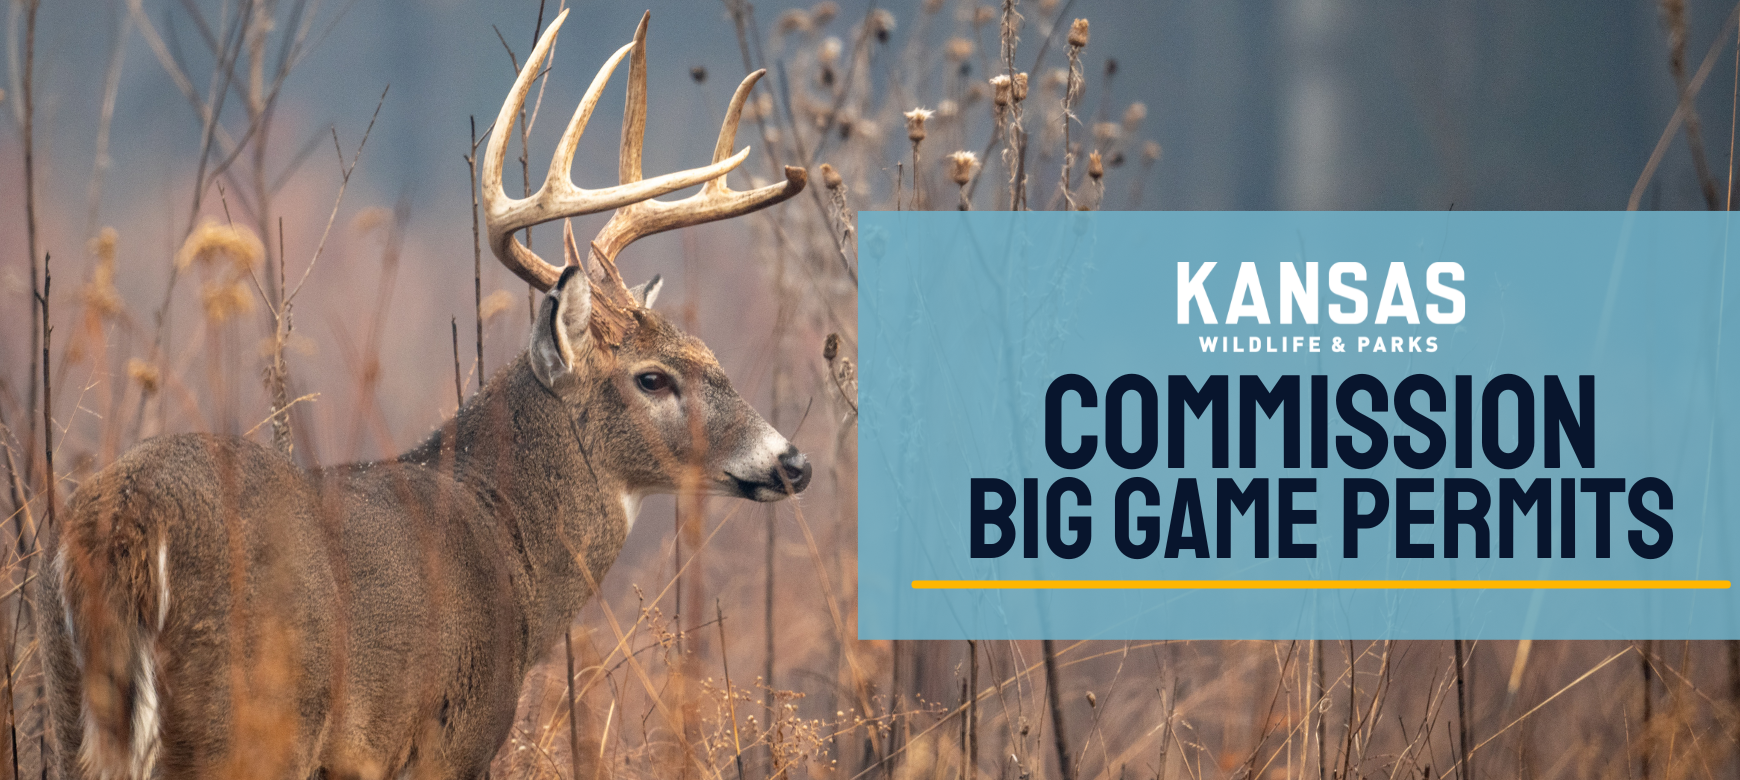 Nonprofits Still Have Time to Apply for Special Big Game Permits